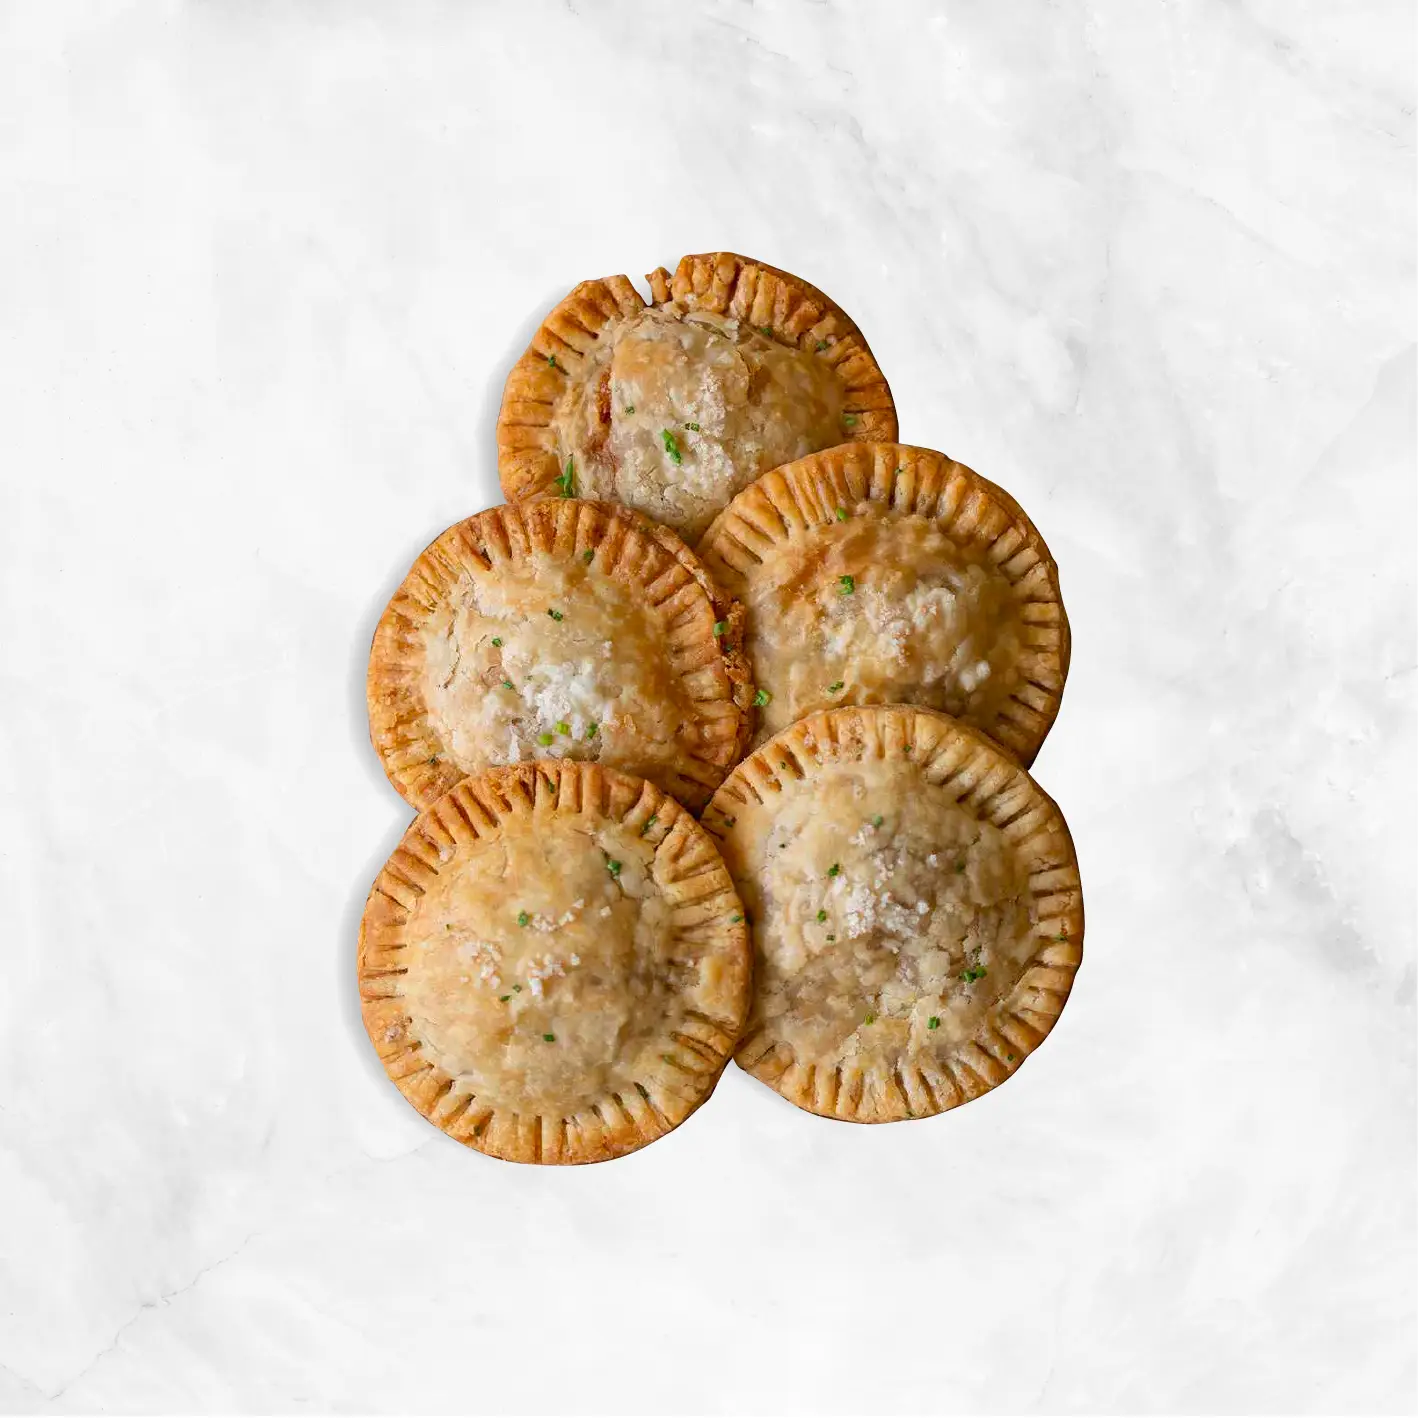  Caramelized Onion and Swiss Cheese Hand Pies